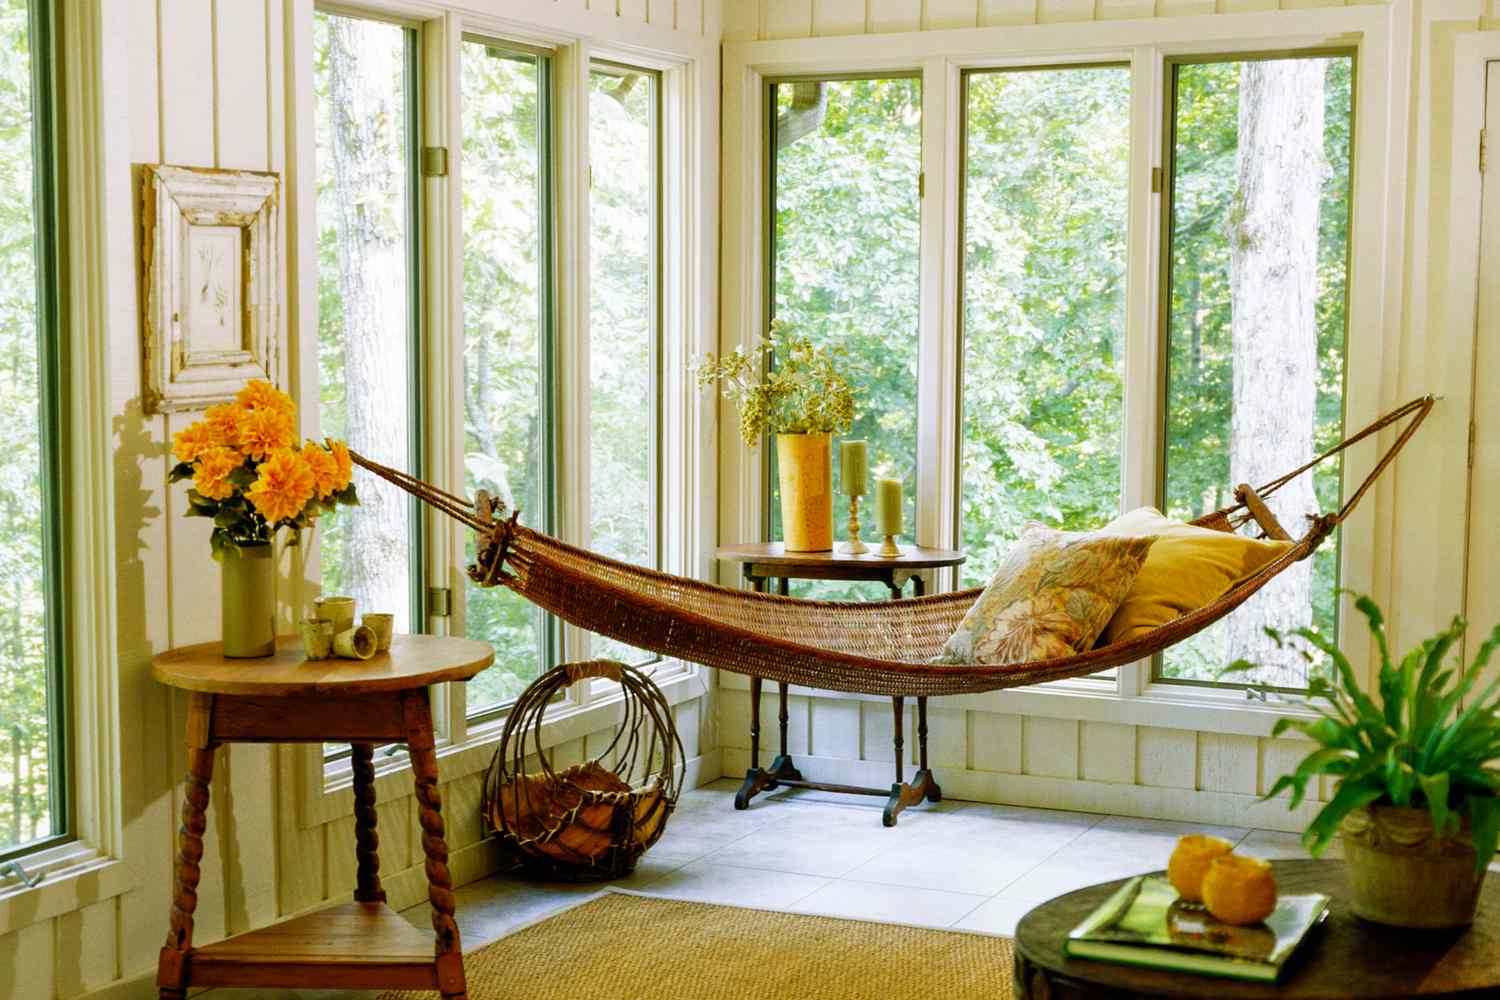 18 Sunroom Decorating Ideas For A Bright, Relaxing Space